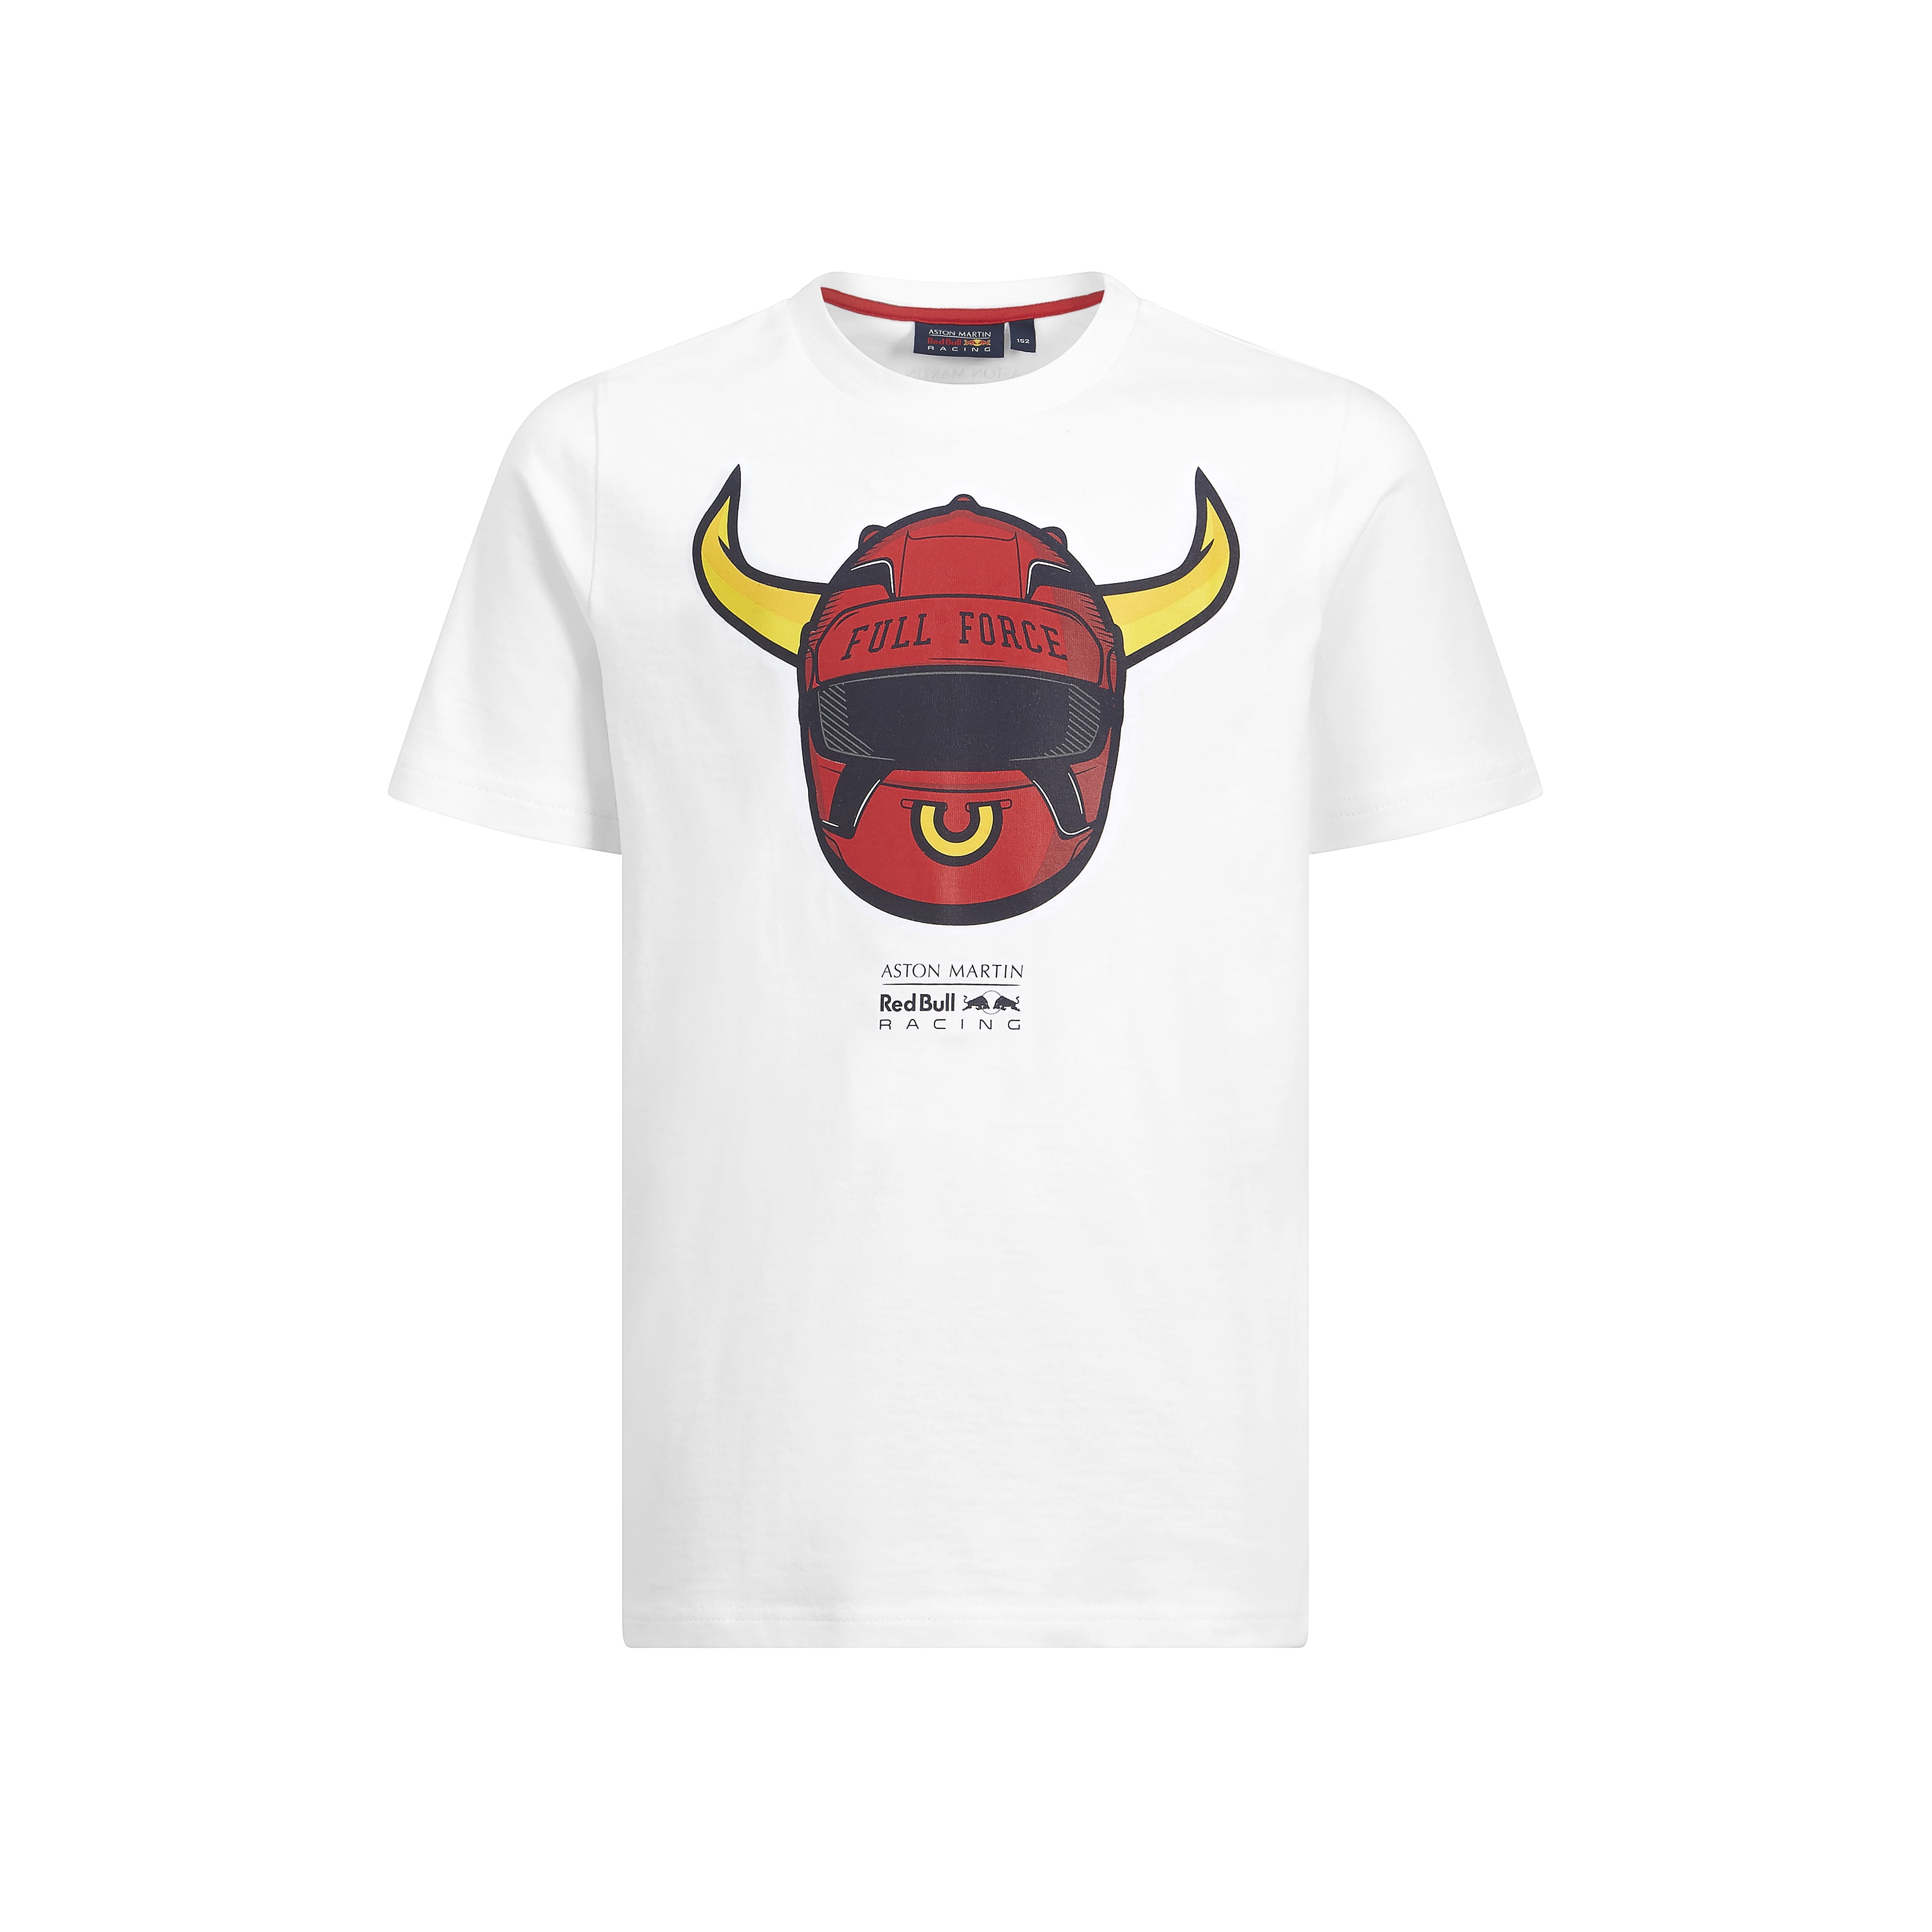 white t shirt with red collar